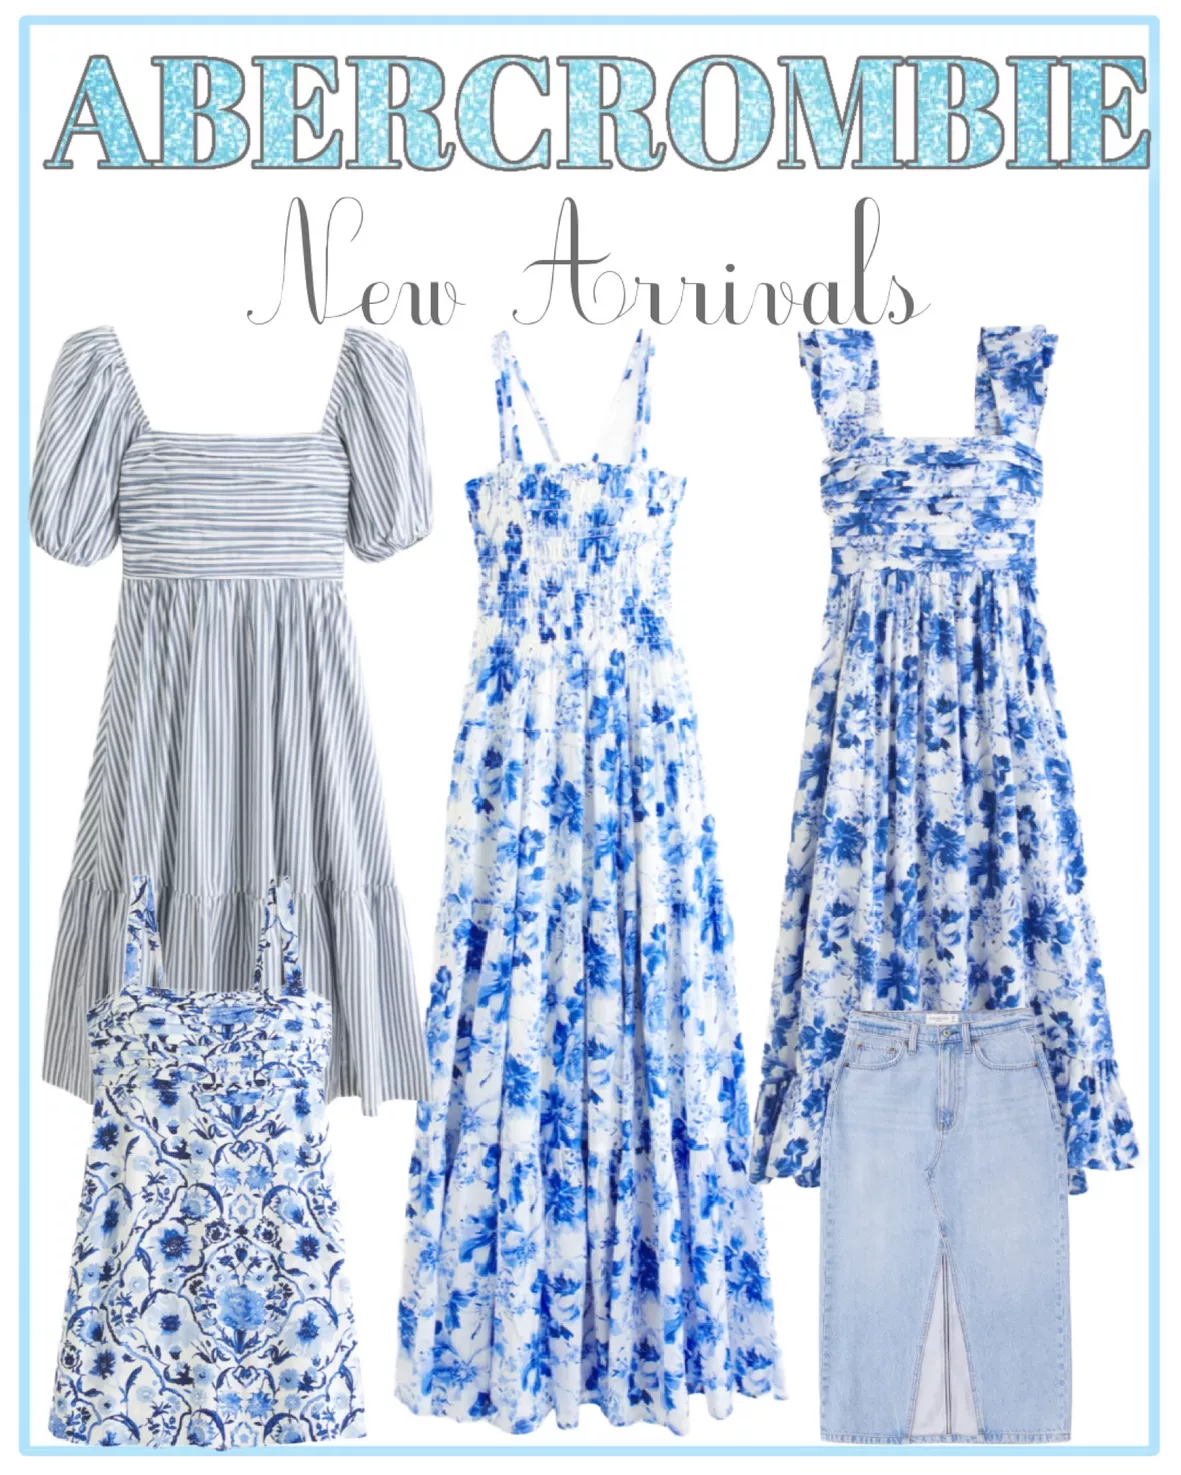 Ever New ruffle strap maxi dress in floral